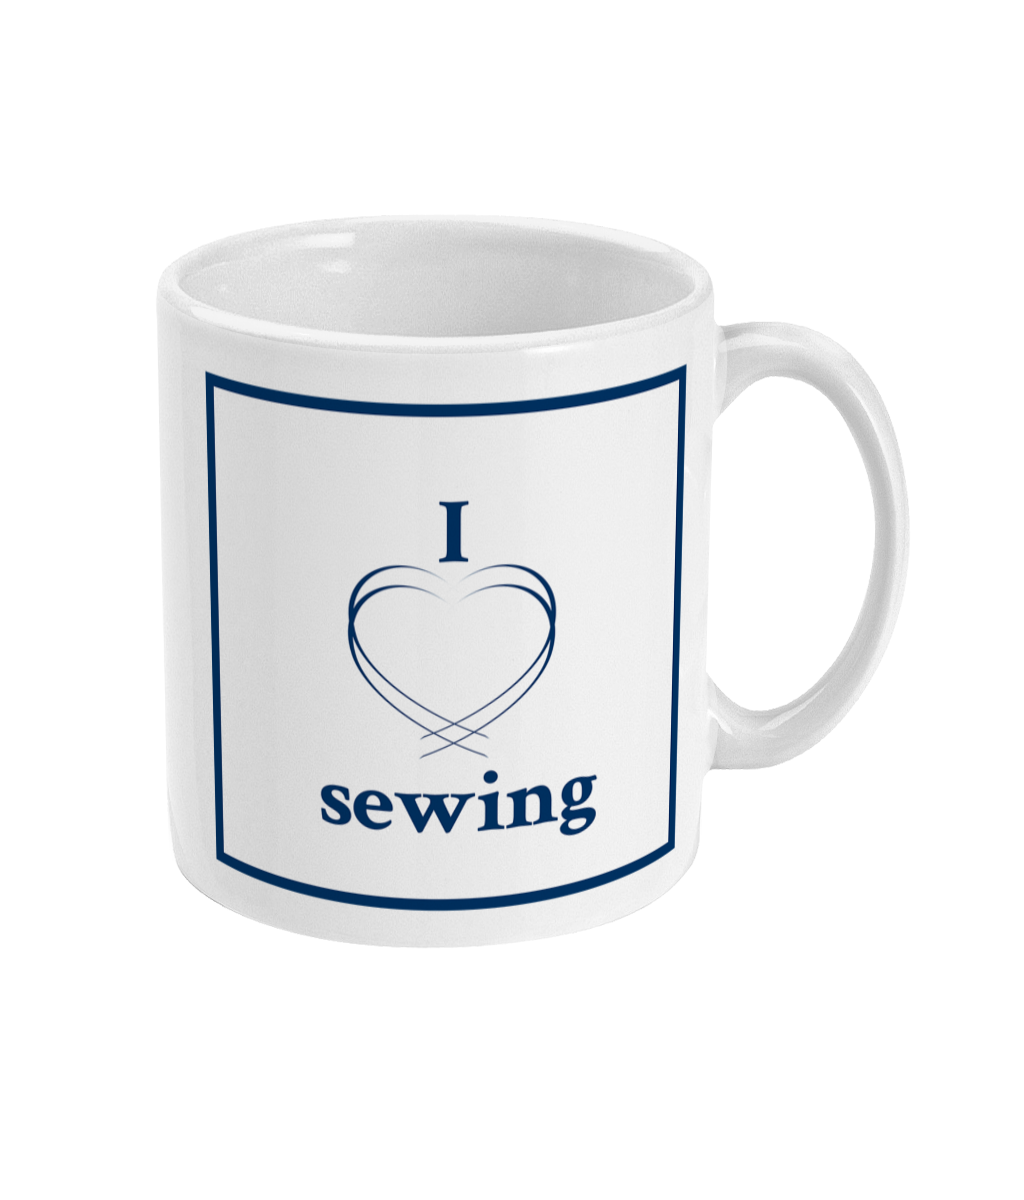 mug with I love sewing printed on it